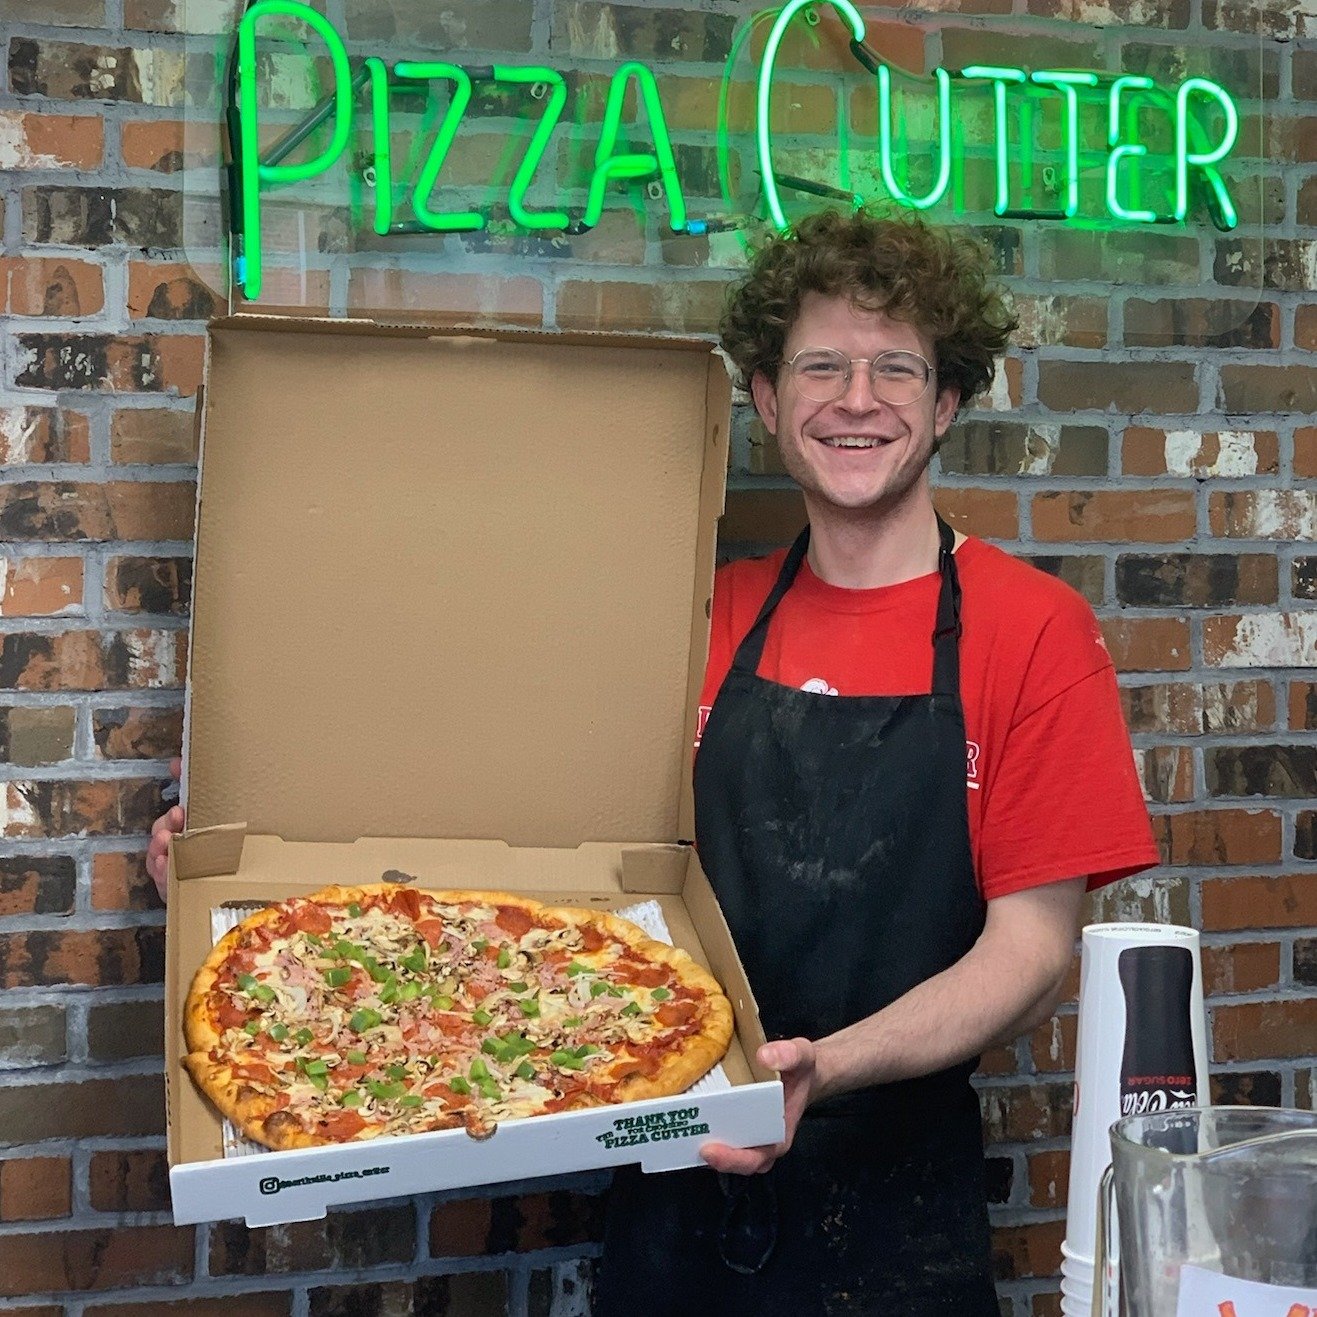 A Chef's Special made by a special chef!! 😍🍕❤️ 

#weloveyouscott #pizza #northvillemichigan #northvillemi #supportsmallbusiness #eatlocal #supportlocalbusiness #supportlocal